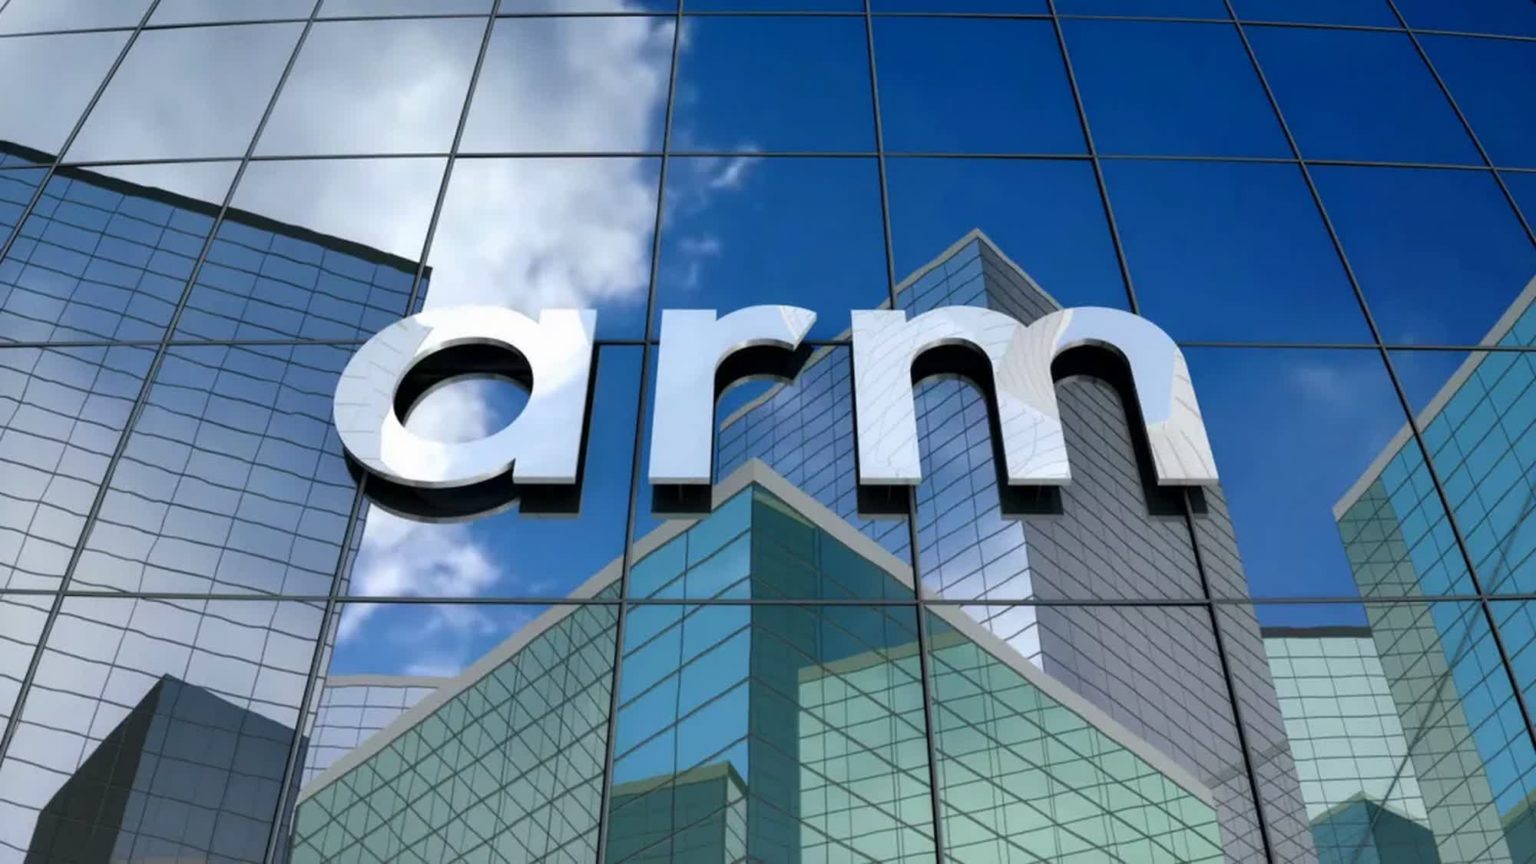 Arm raises nearly $5 billion in this year